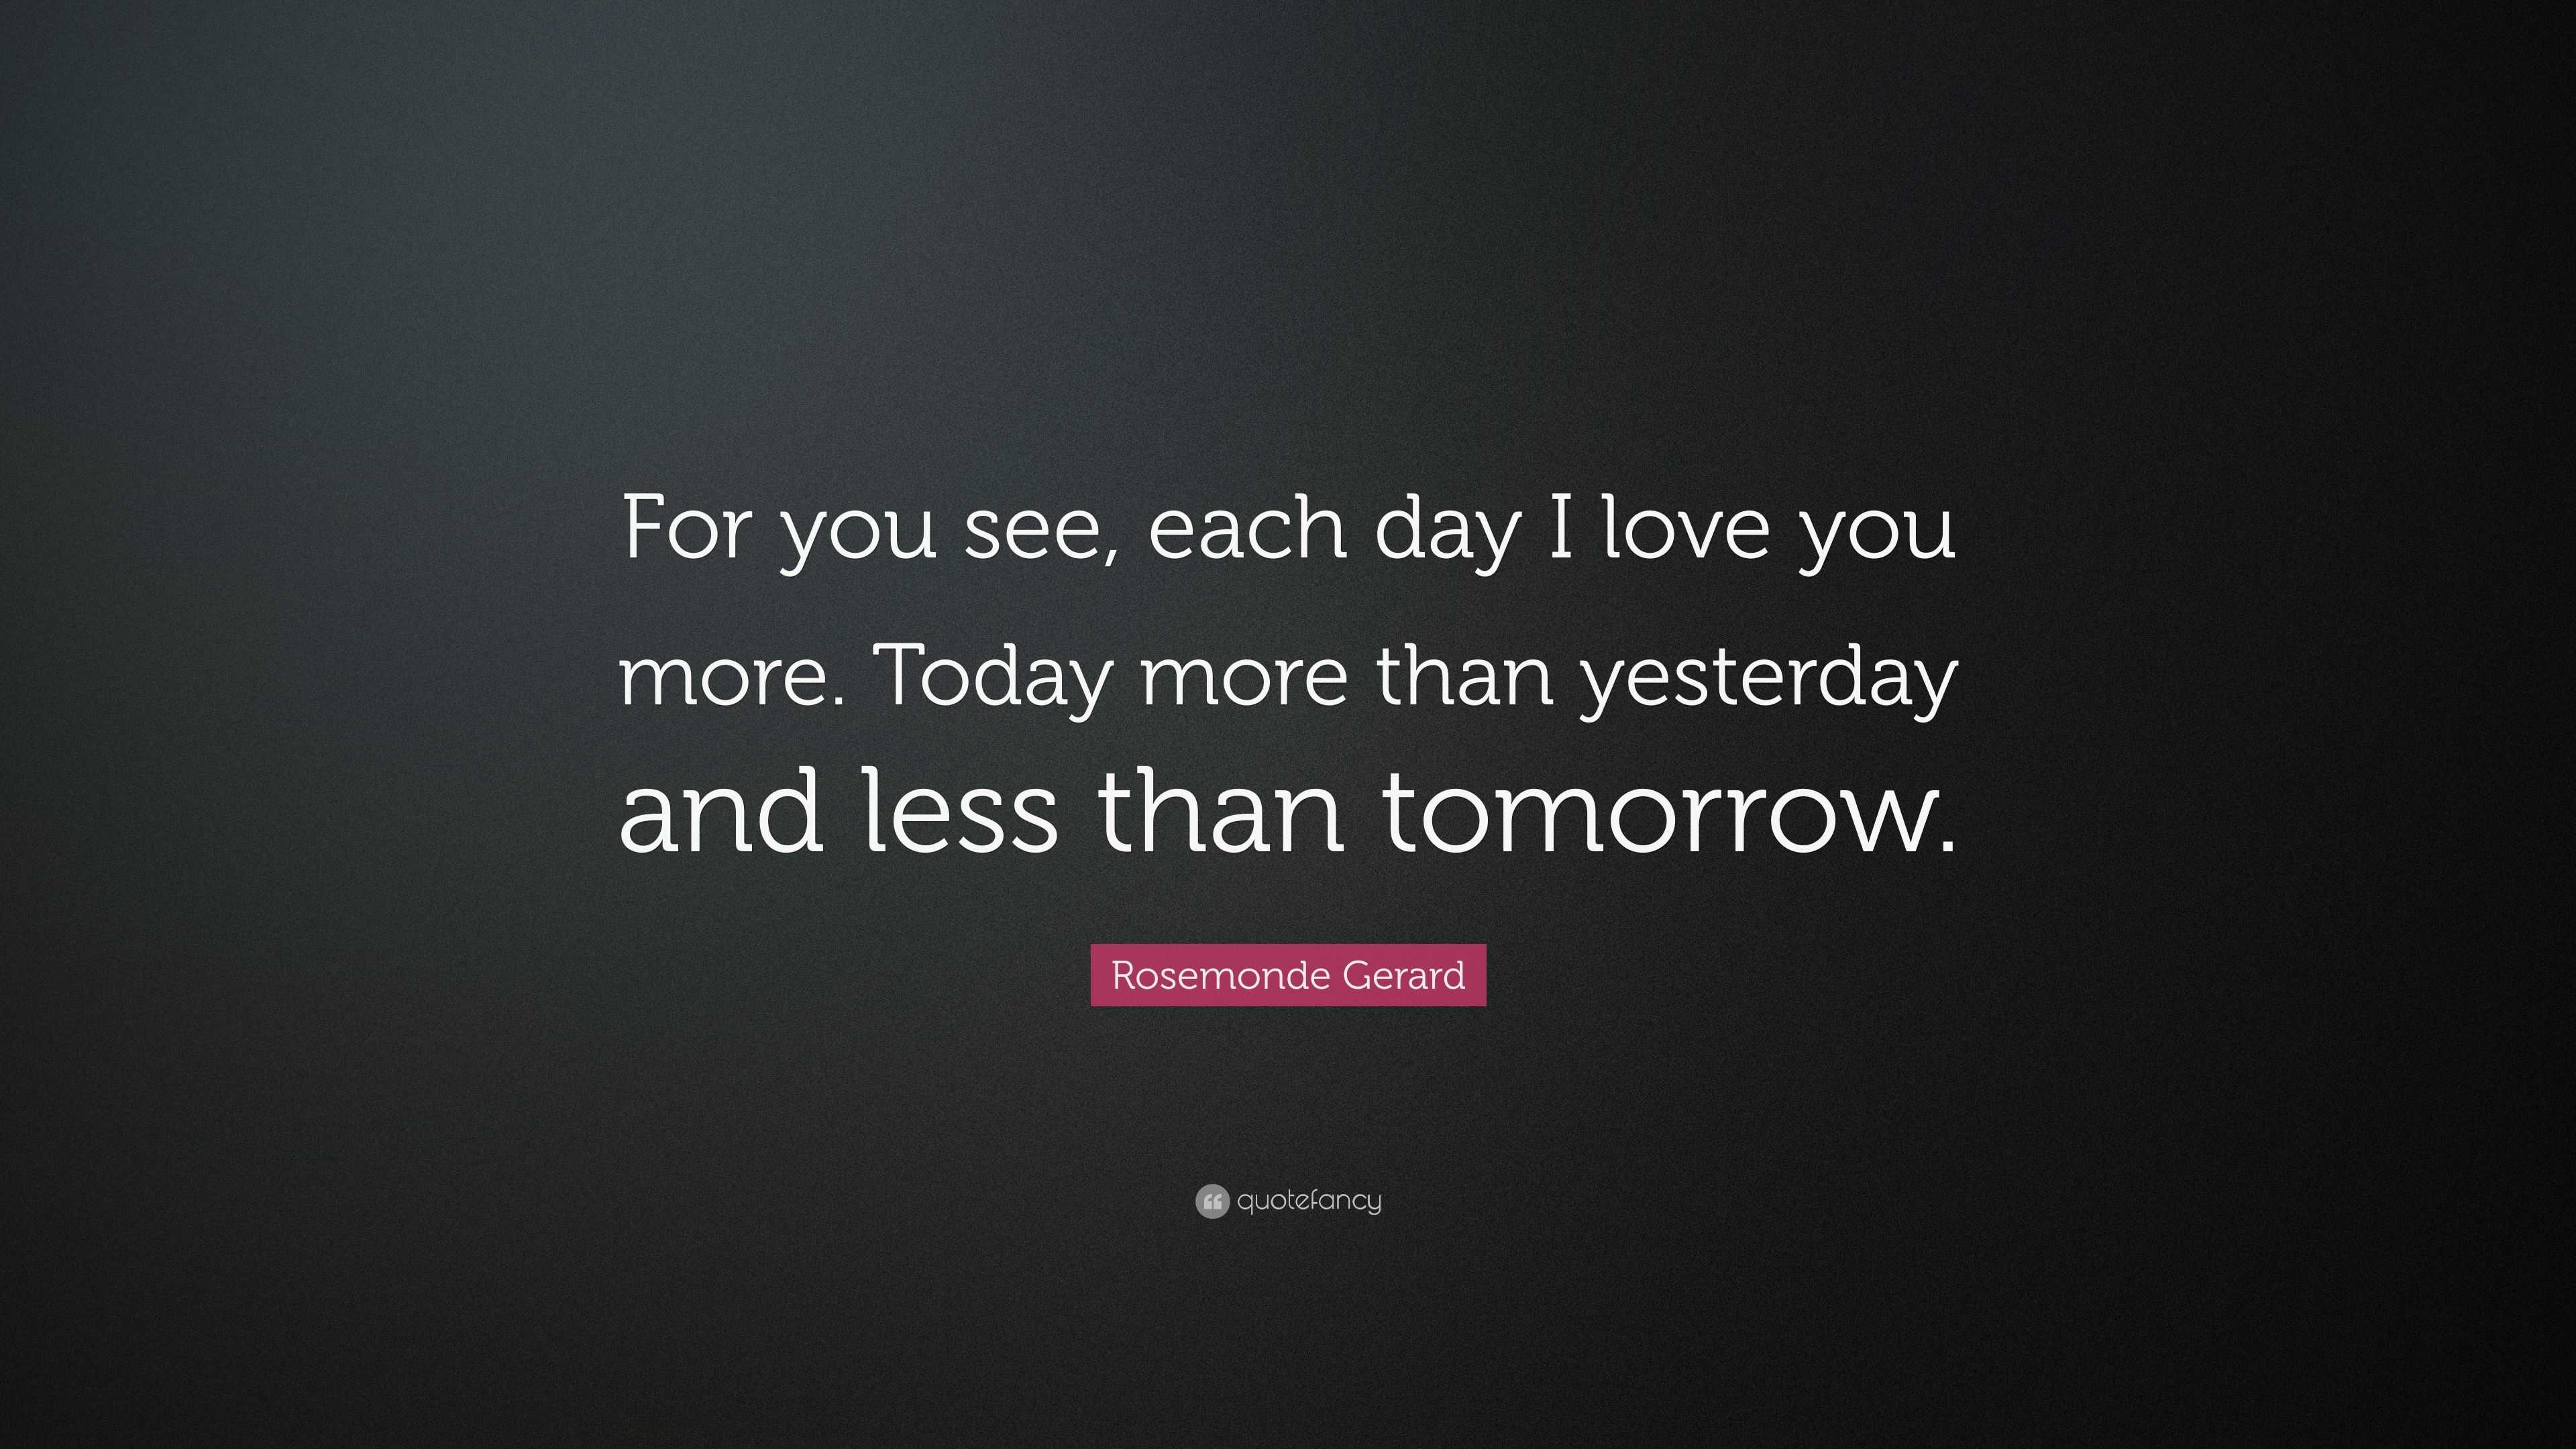 Rosemonde Gerard Quote “For you see each day I love you more